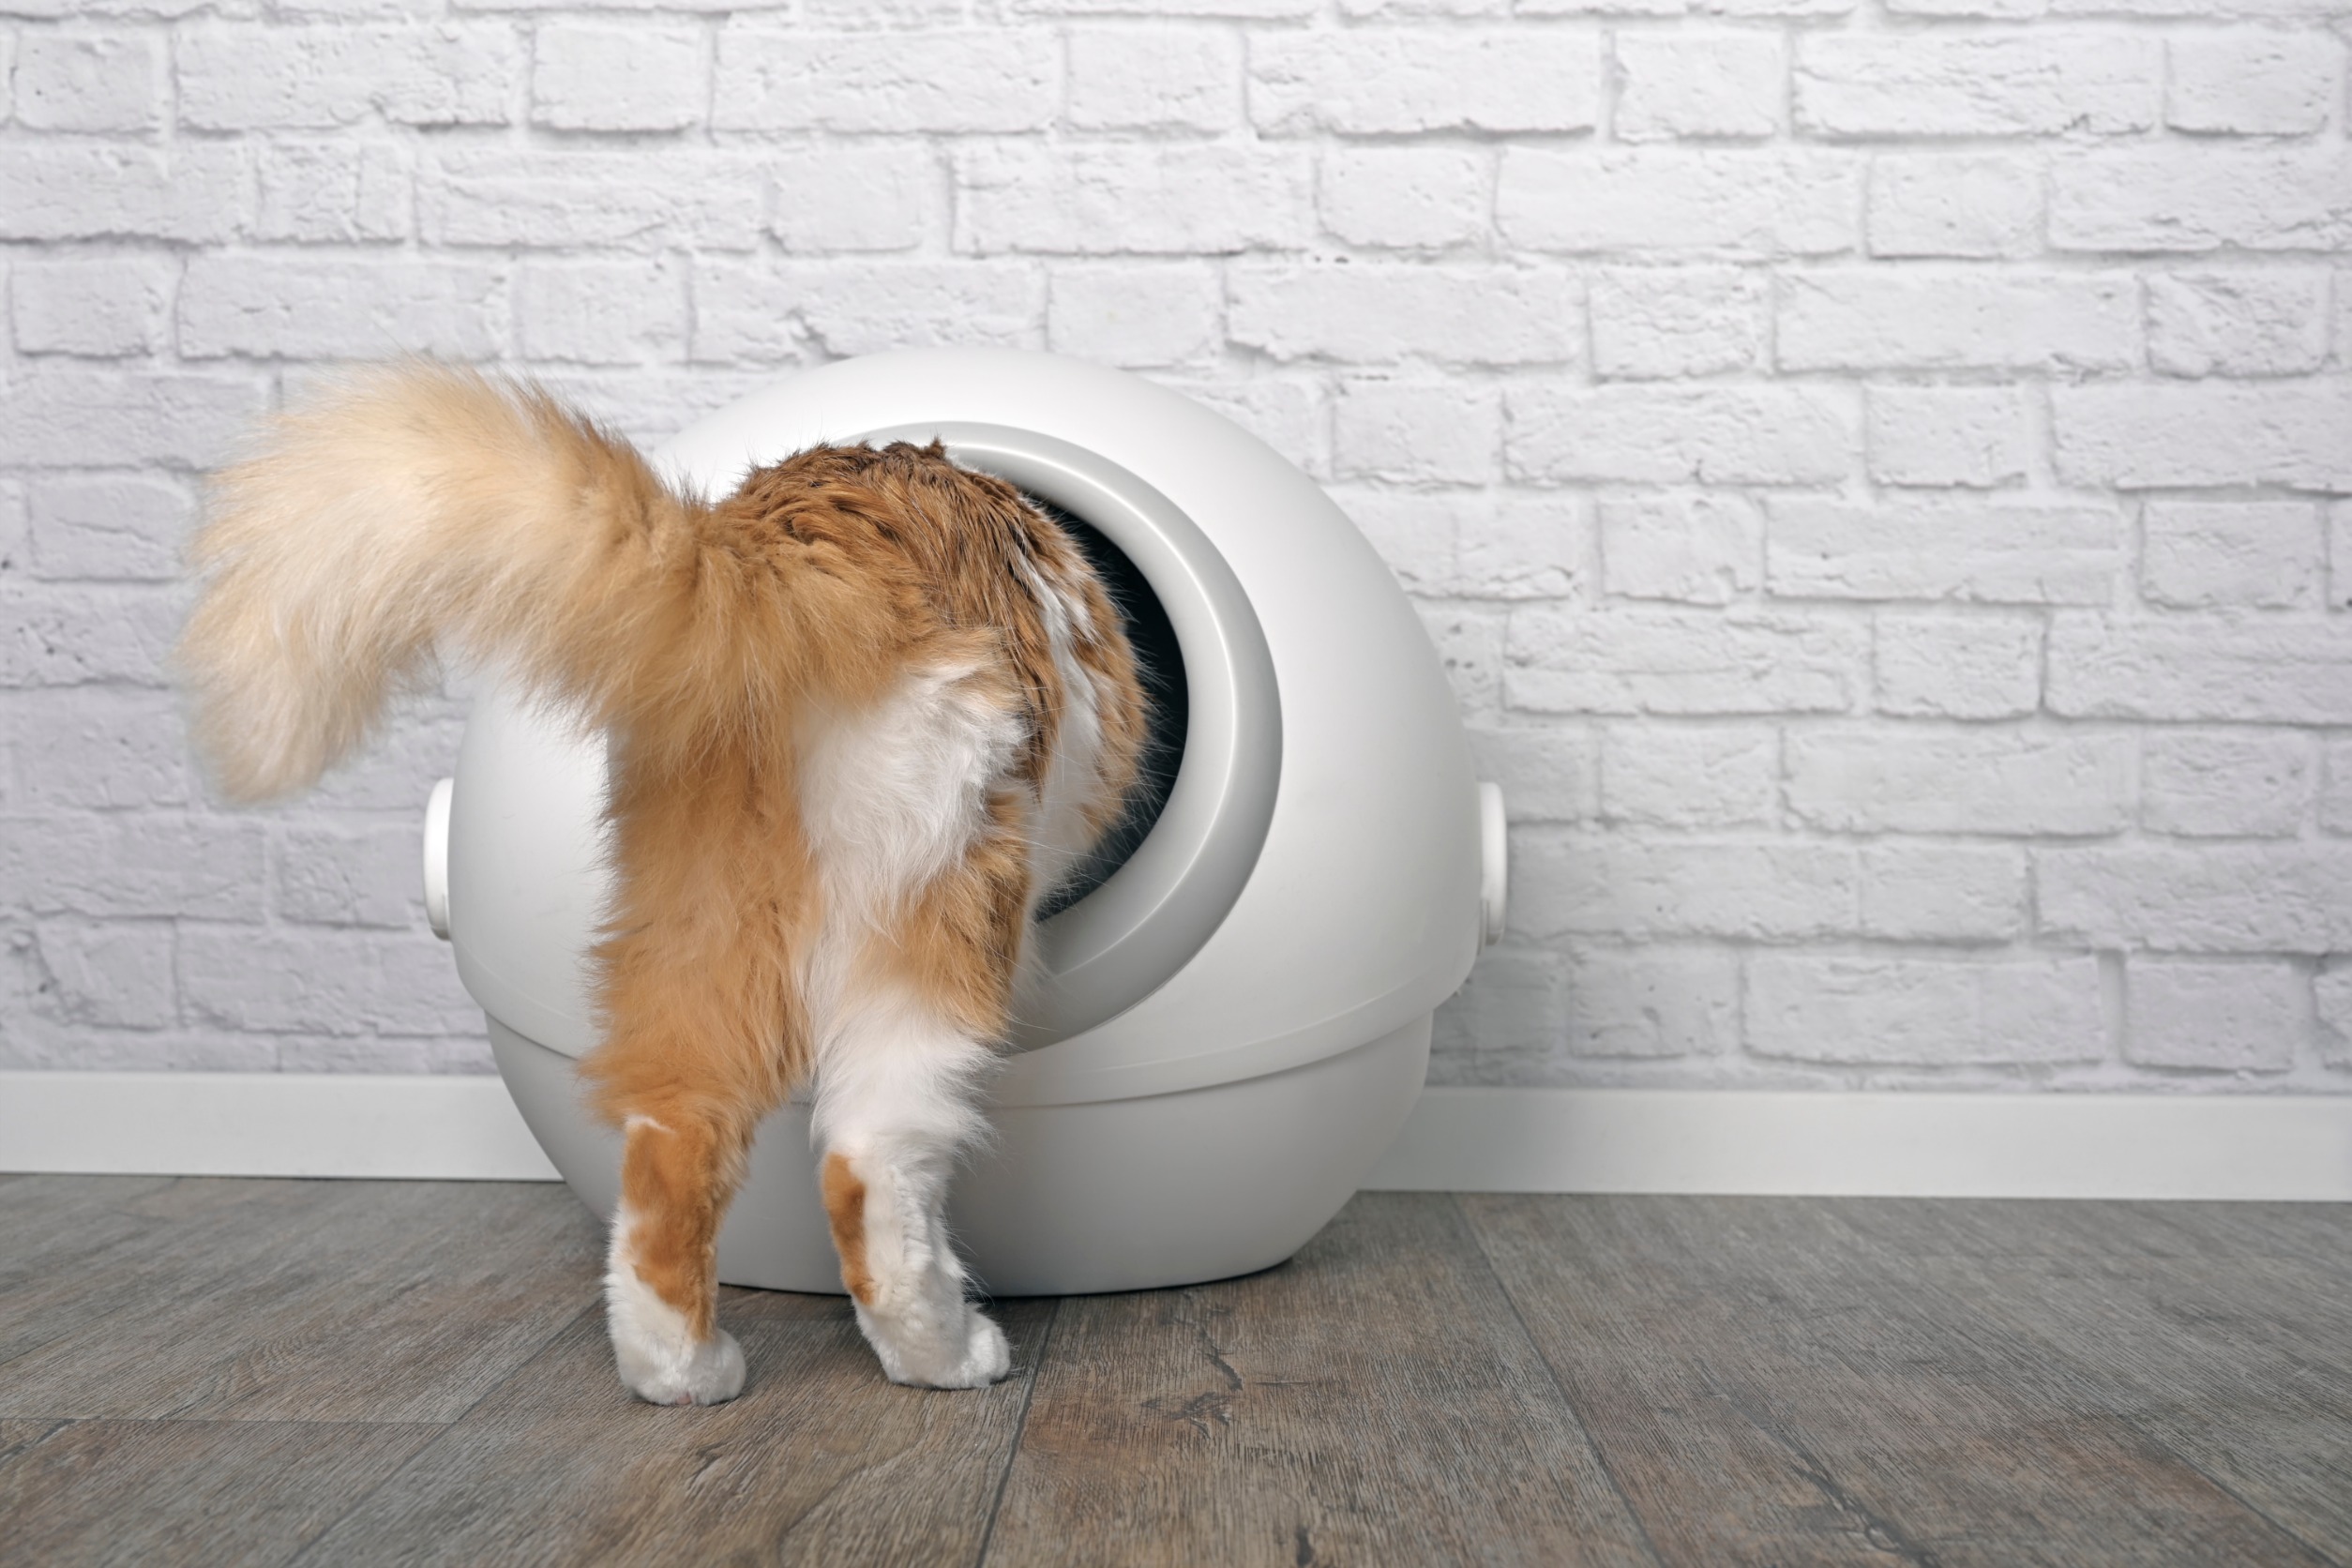 Automatic litter boxes are growing in popularity - and as a cat owners we're always looking for ways to make our feline friend's life better.